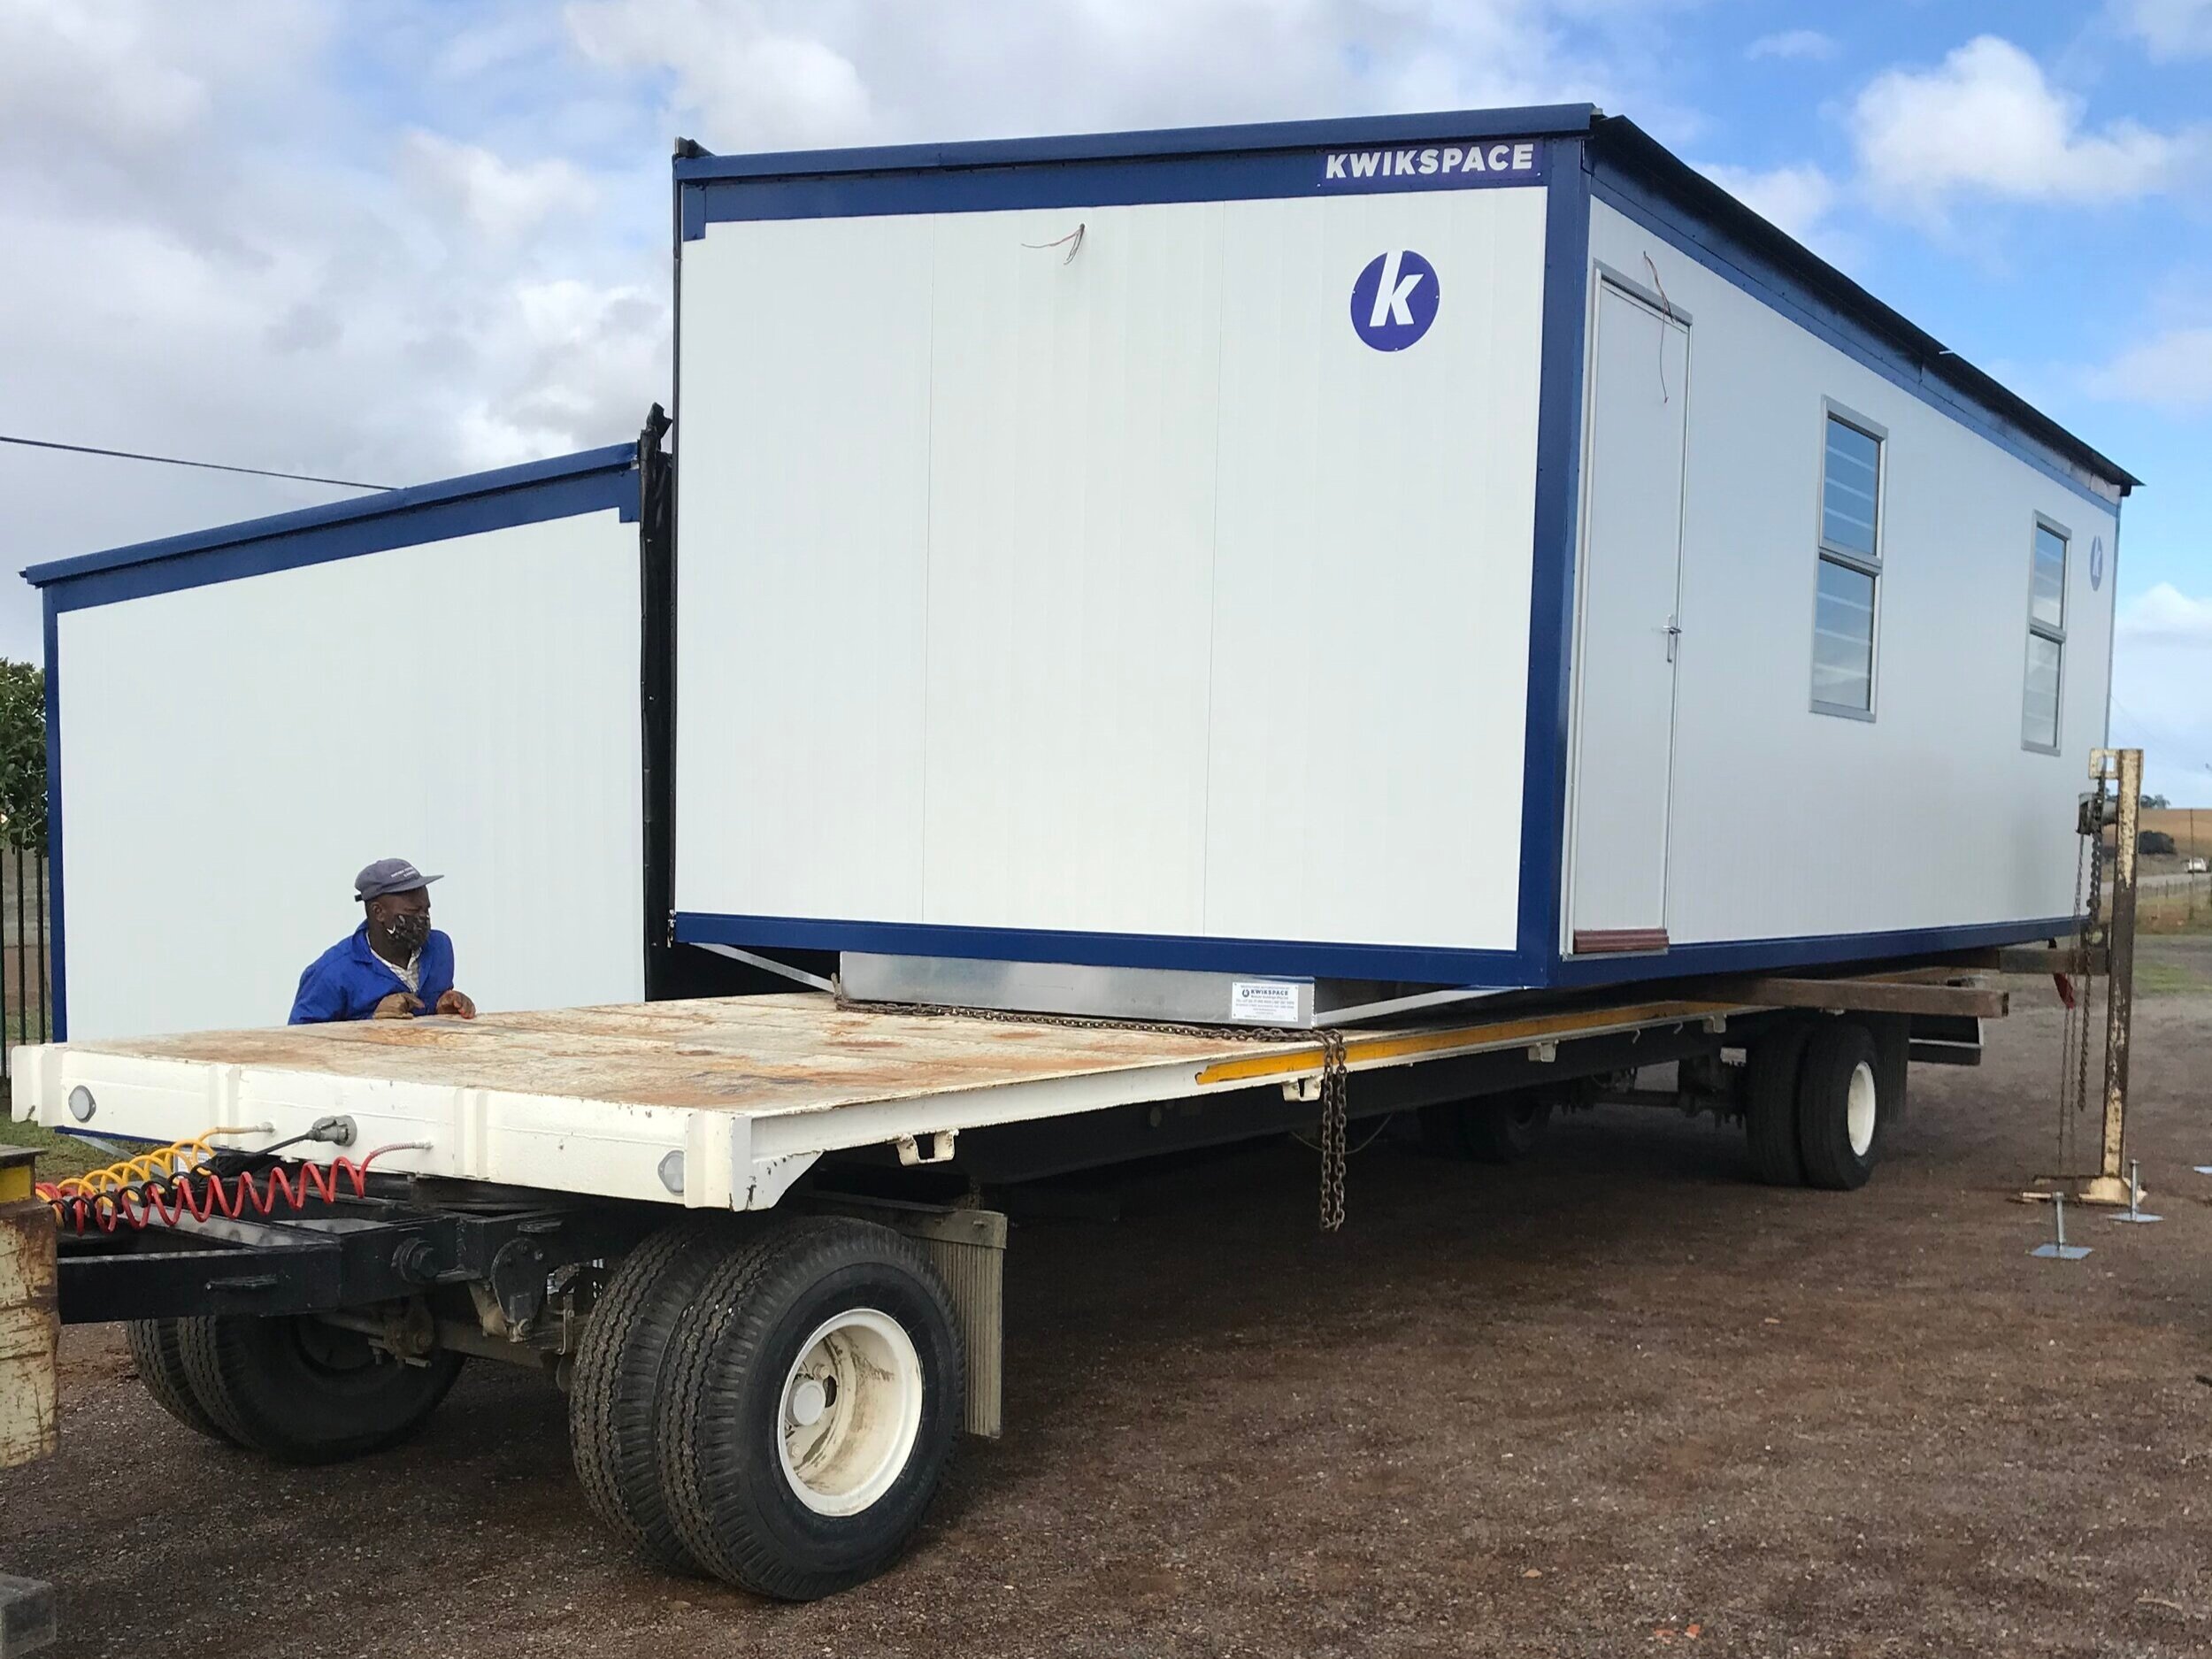 Mobile classroom arriving on site